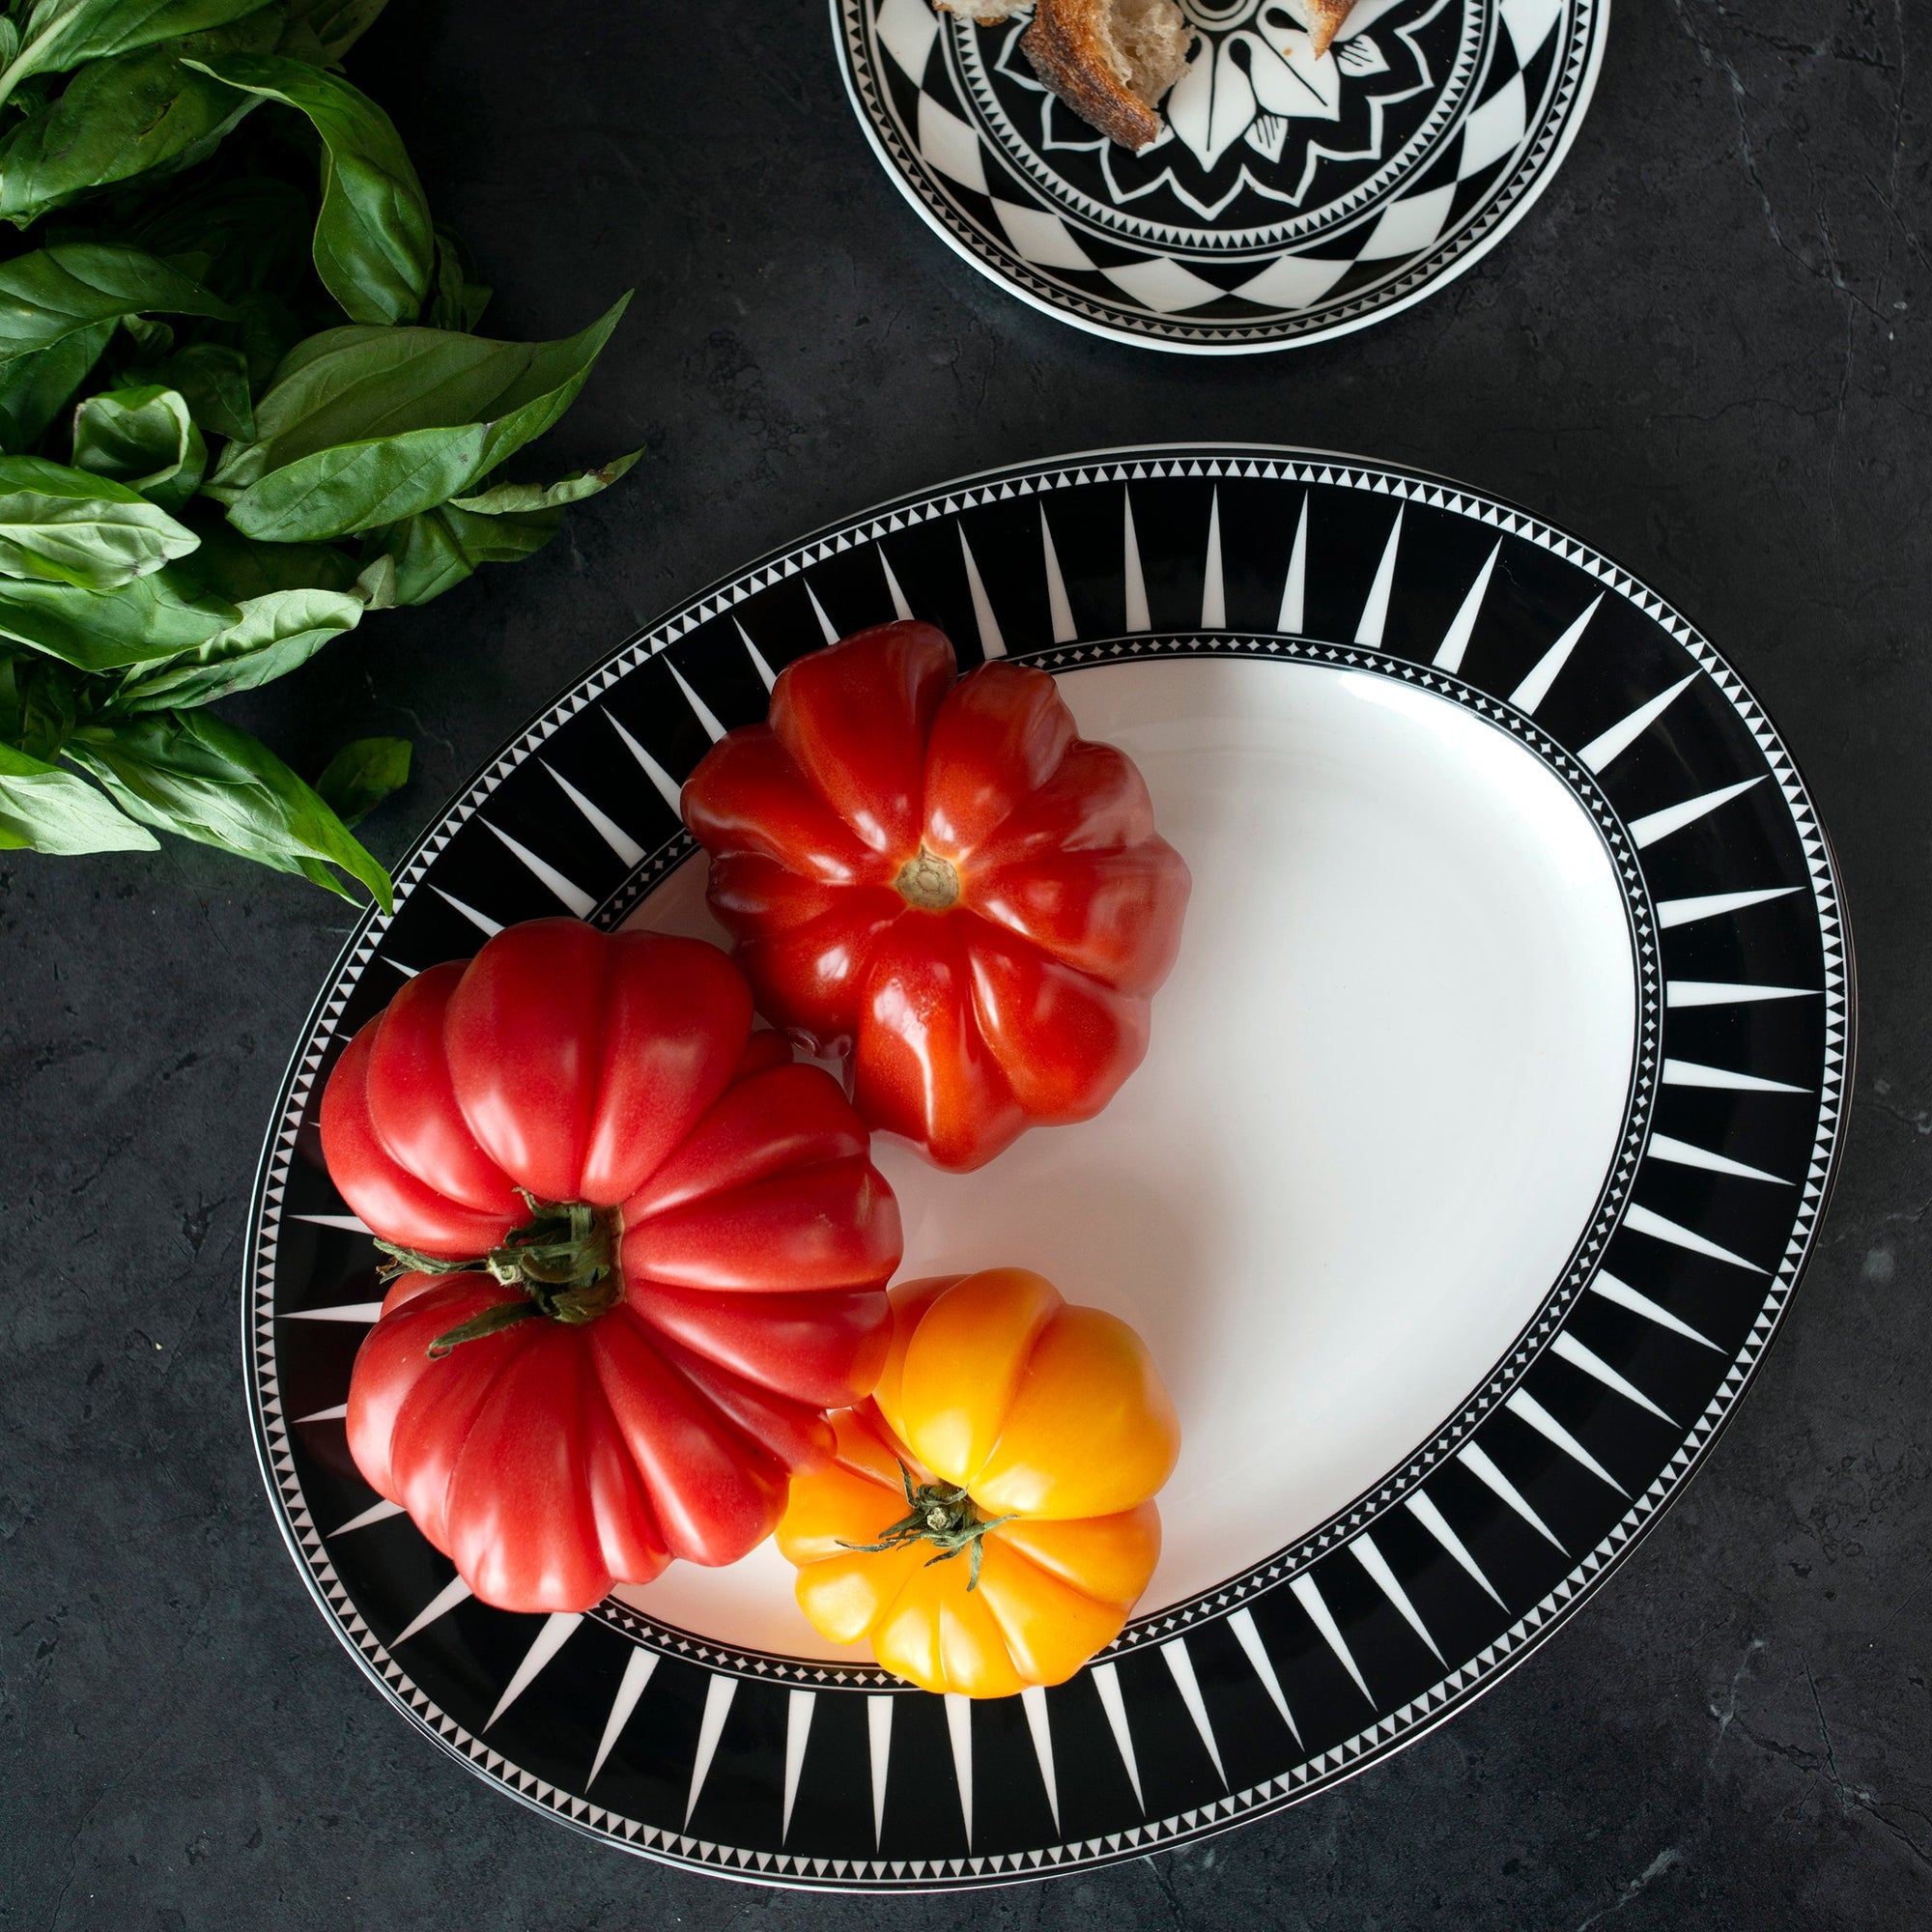 A *Marrakech Oval Rimmed Platter* from *Caskata Artisanal Home*, with a black and white geometric border design, inspired by Moroccan ceramics.